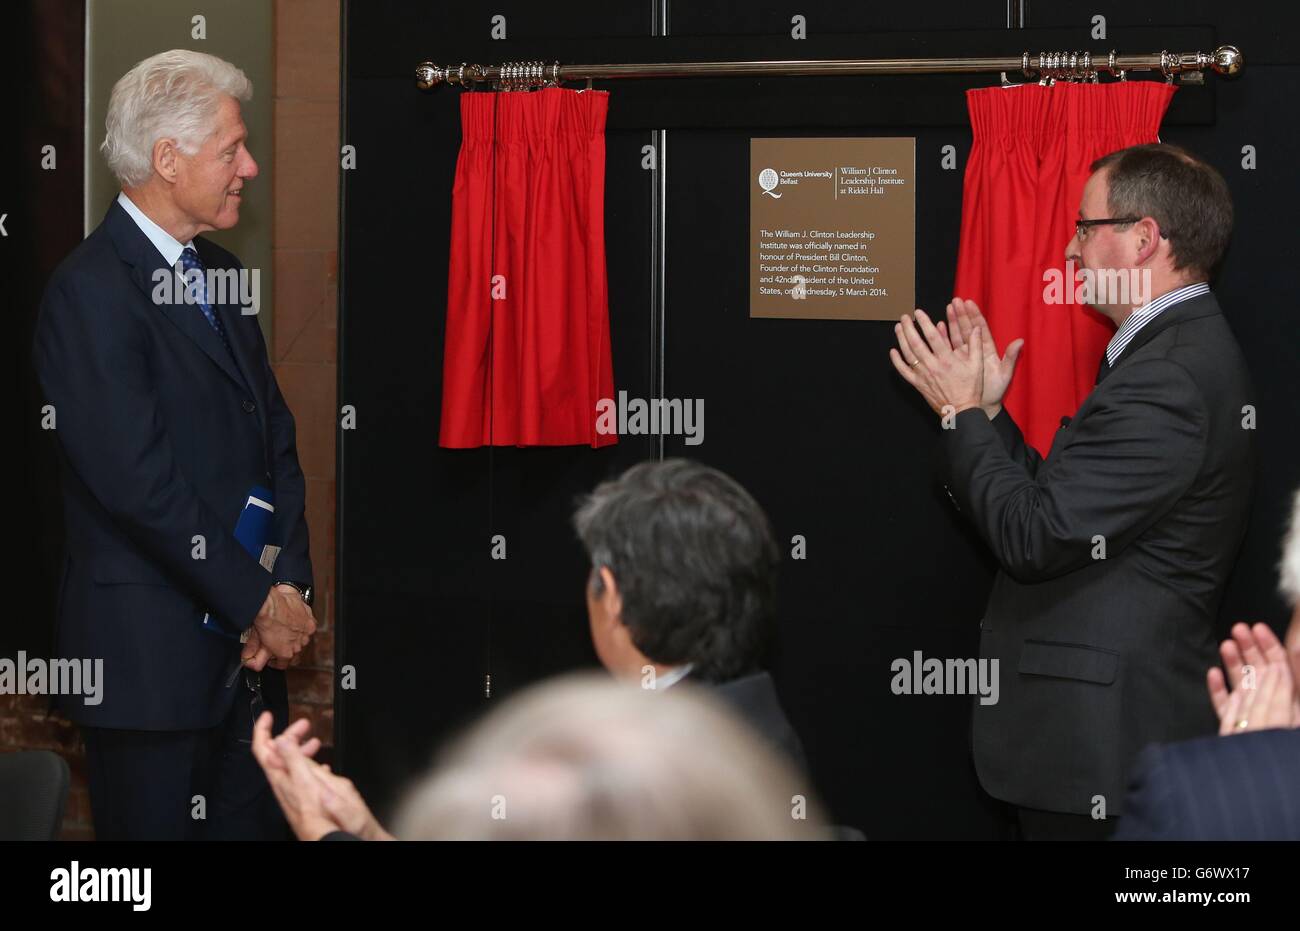 President and Vice-Chancellor of Queen's University Belfast Professor Patrick Johnston (right) applauds former US president Bill Clinton as he unveils a plaque for the William J. Clinton Leadership Institute at Riddel Hall, Queen's University Belfast, Belfast. Stock Photo